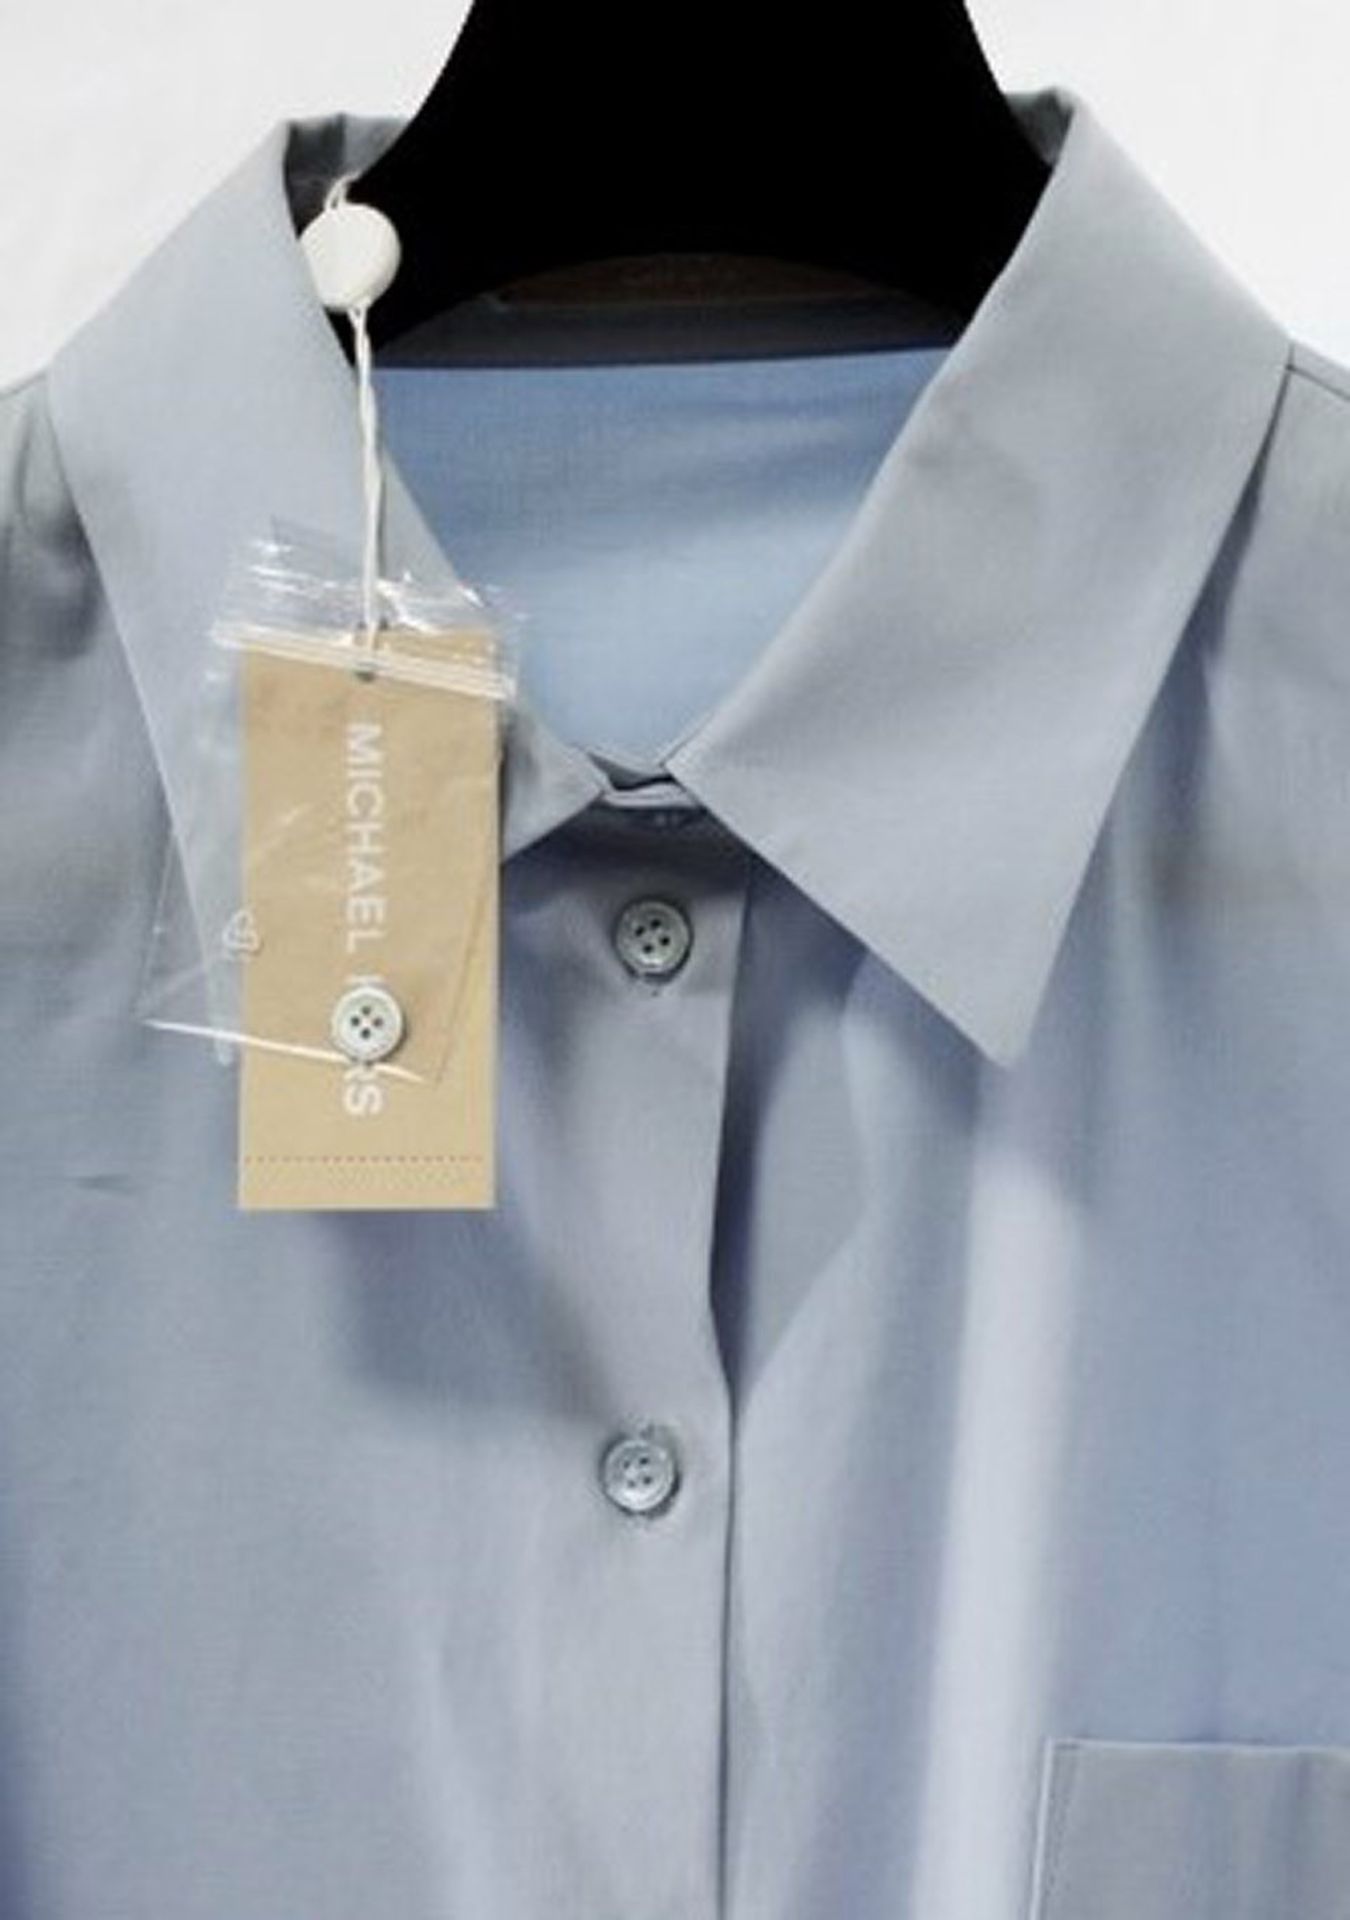 1 x Michael Kors Blue Shirt - Size: 18 - Material: 96% Cotton, 4% Spandex - From a High End Clothing - Image 2 of 5